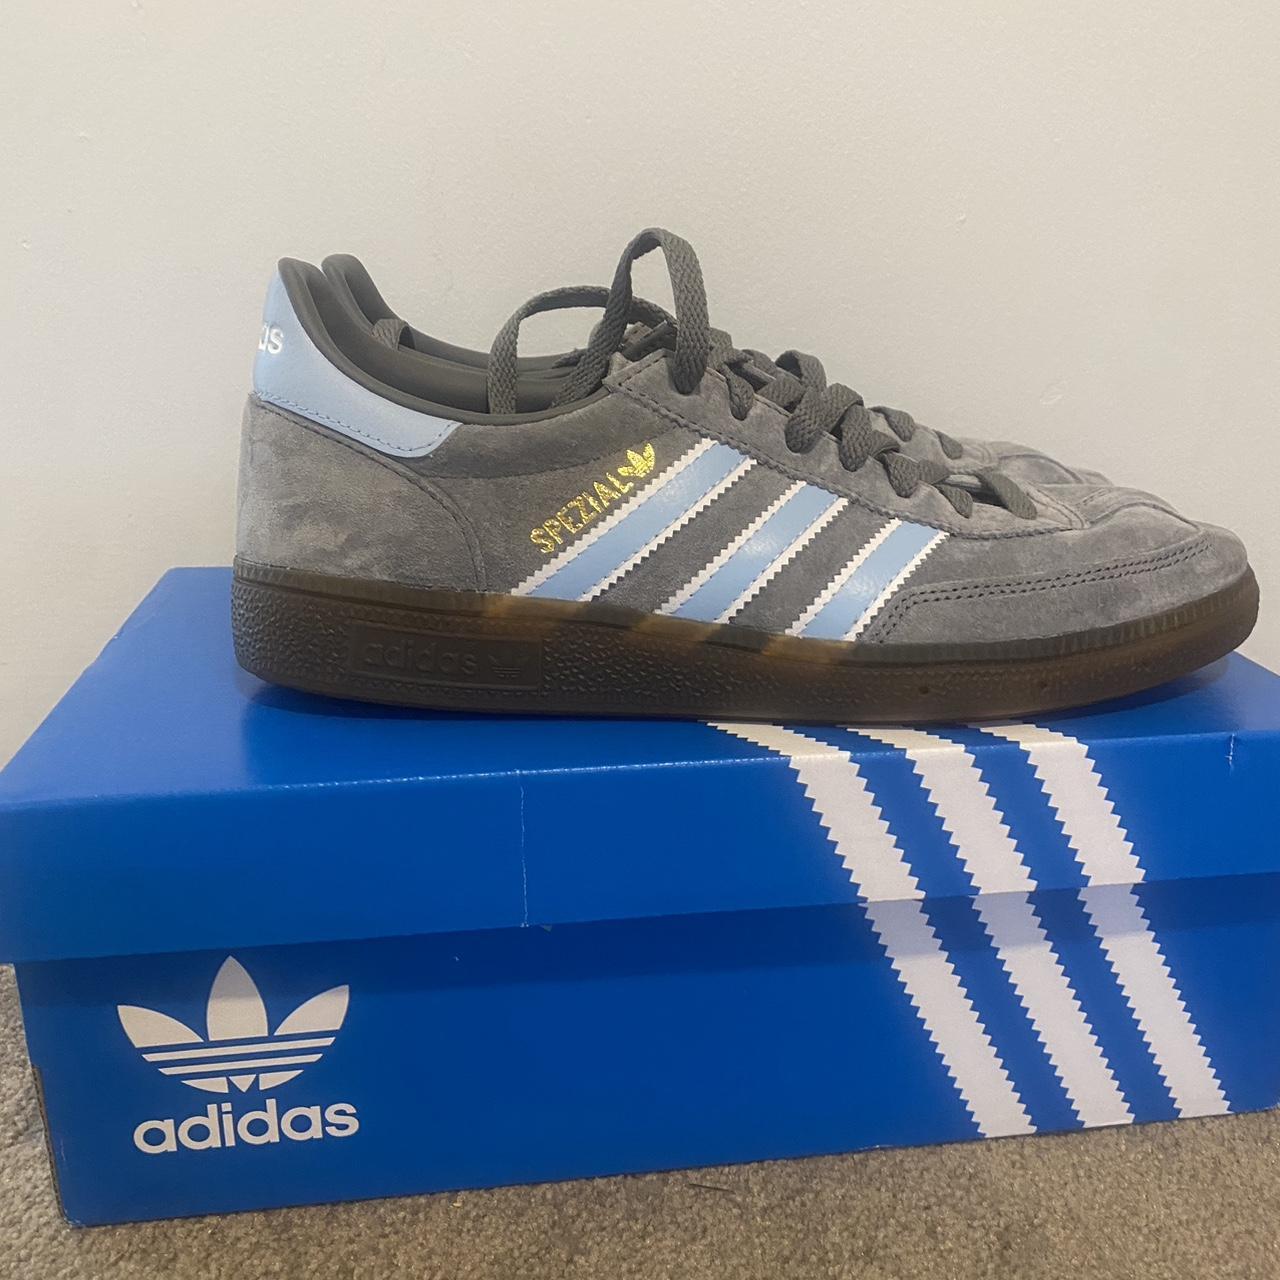 SOLD Adidas spezial sold out online Never worn only... - Depop